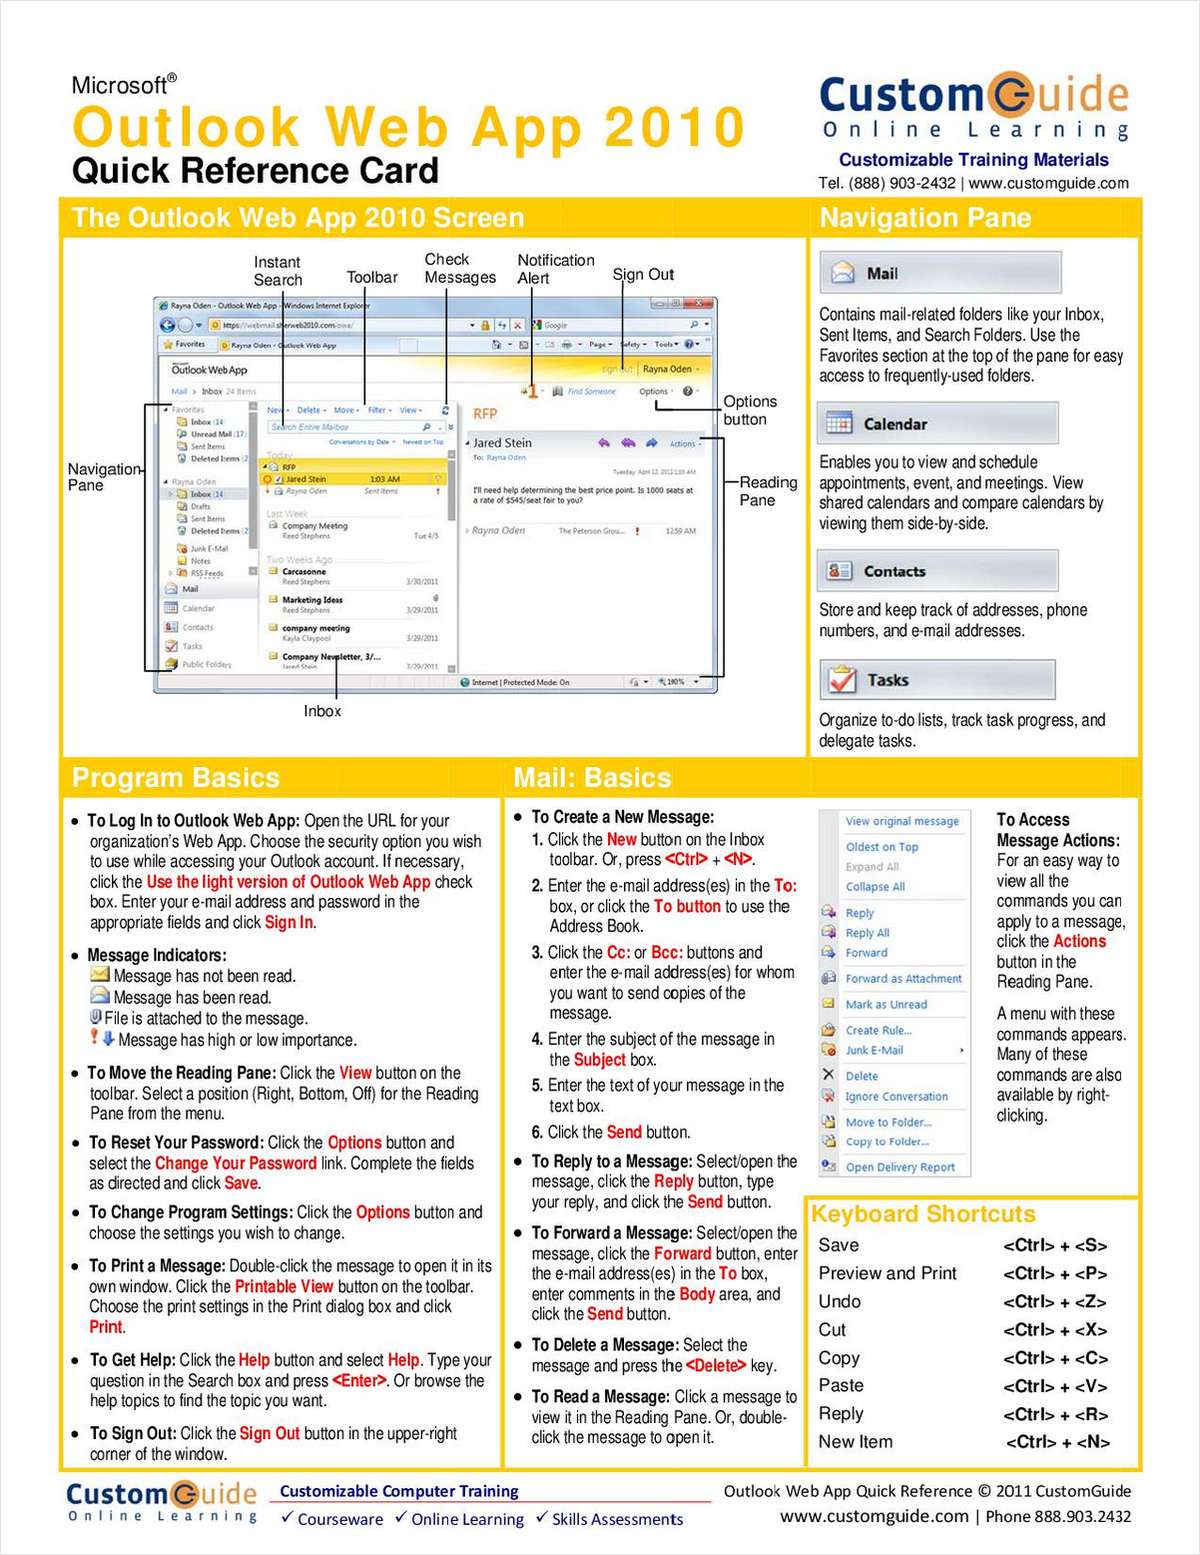 Microsoft Outlook Web App 2010-- Free Quick Reference Card